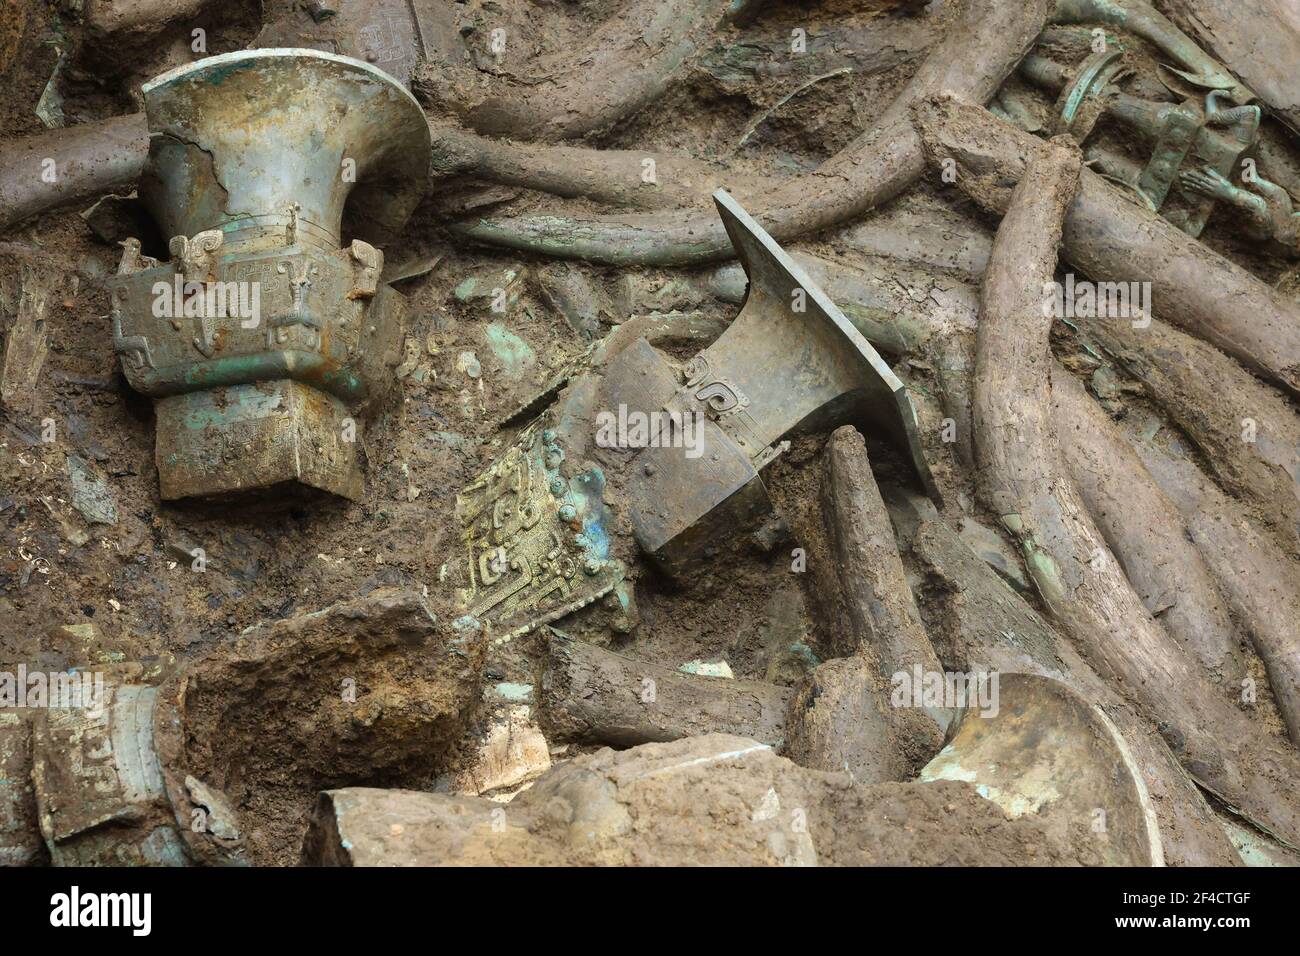 (210320) -- CHENGDU, March 20, 2021 (Xinhua) -- Undated photo provided by the Sanxingdui Ruins sacrificial pits archaeological project shows some of the relics unearthed from the Sanxingdui Ruins site in southwest China's Sichuan Province. Chinese archaeologists announced Saturday that some new major discoveries have been made at the legendary Sanxingdui Ruins site in southwest China, helping shed light on the cultural origins of the Chinese nation.   Archaeologists have found six new sacrificial pits and unearthed more than 500 items dating back about 3,000 years at the Sanxingdui Ruins in Si Stock Photo